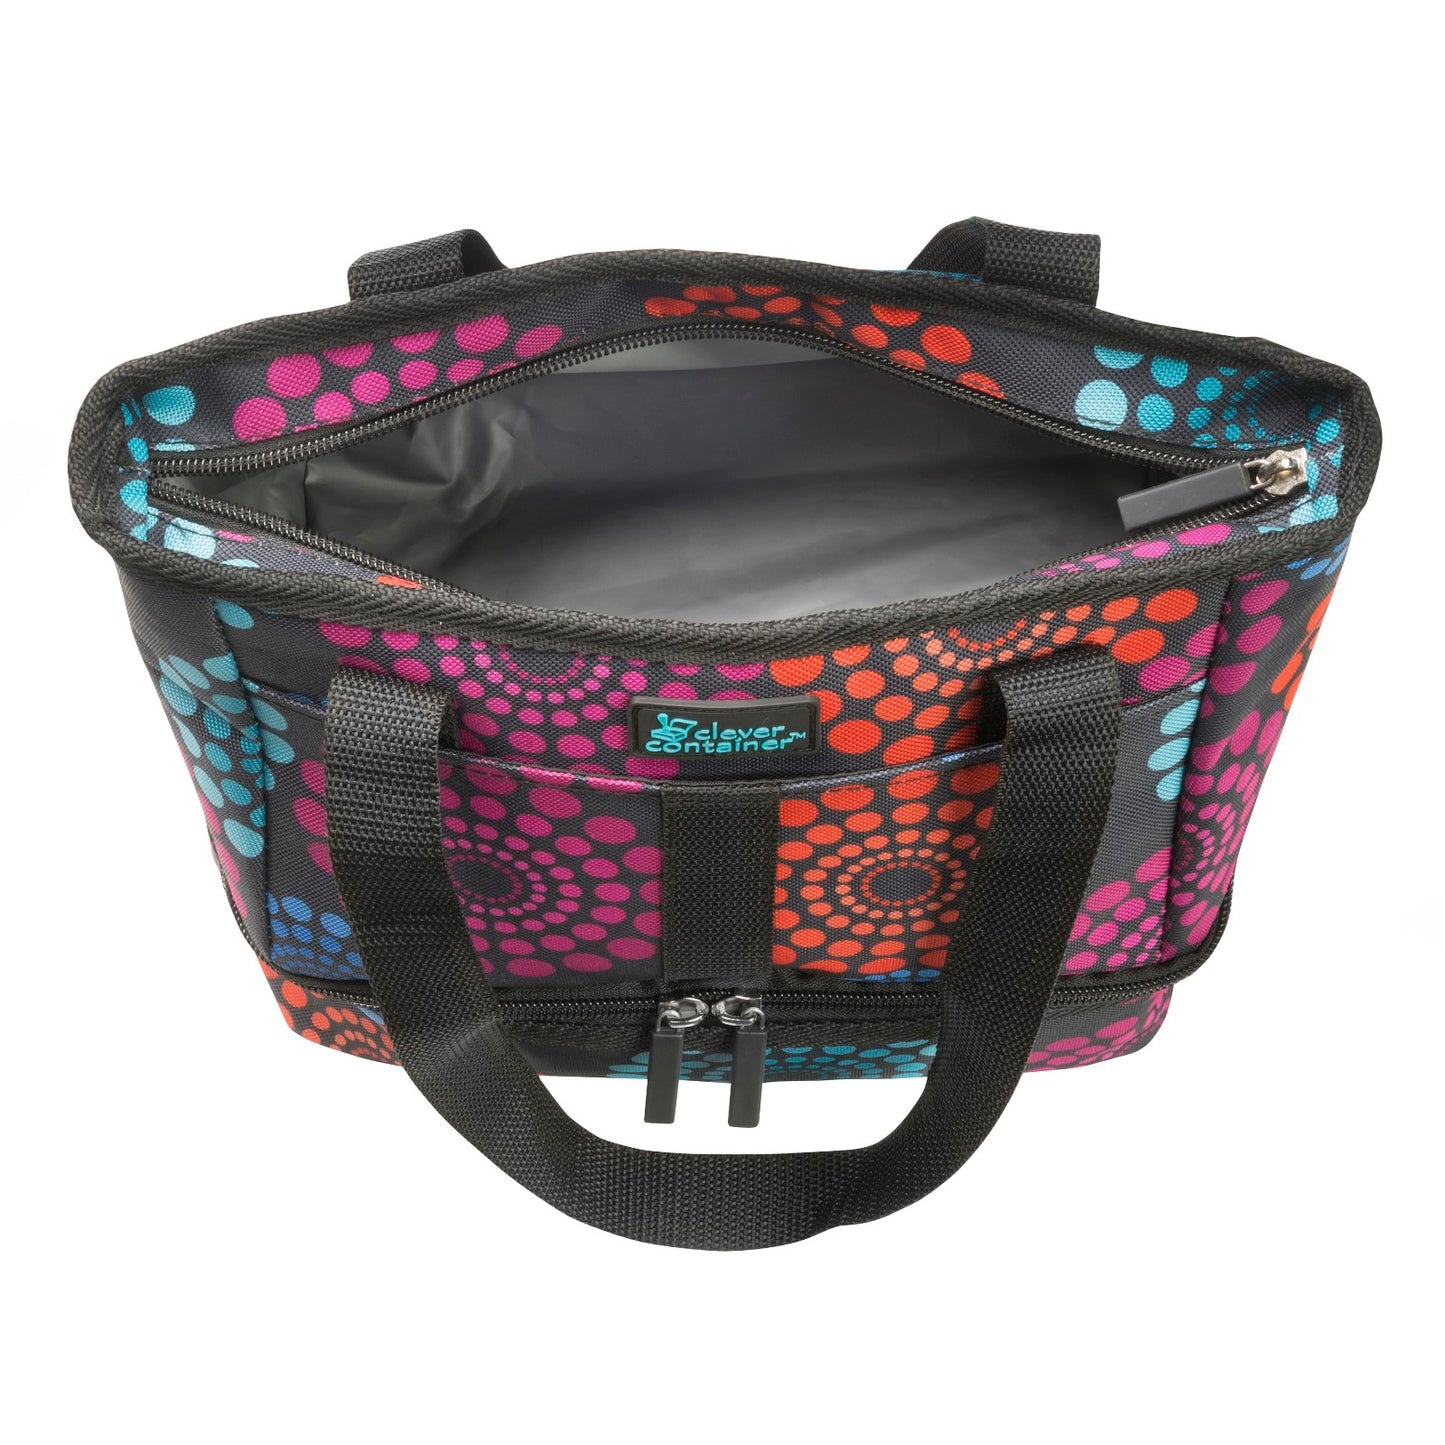 Insulated Meal & Snack Bag - Bright Lights